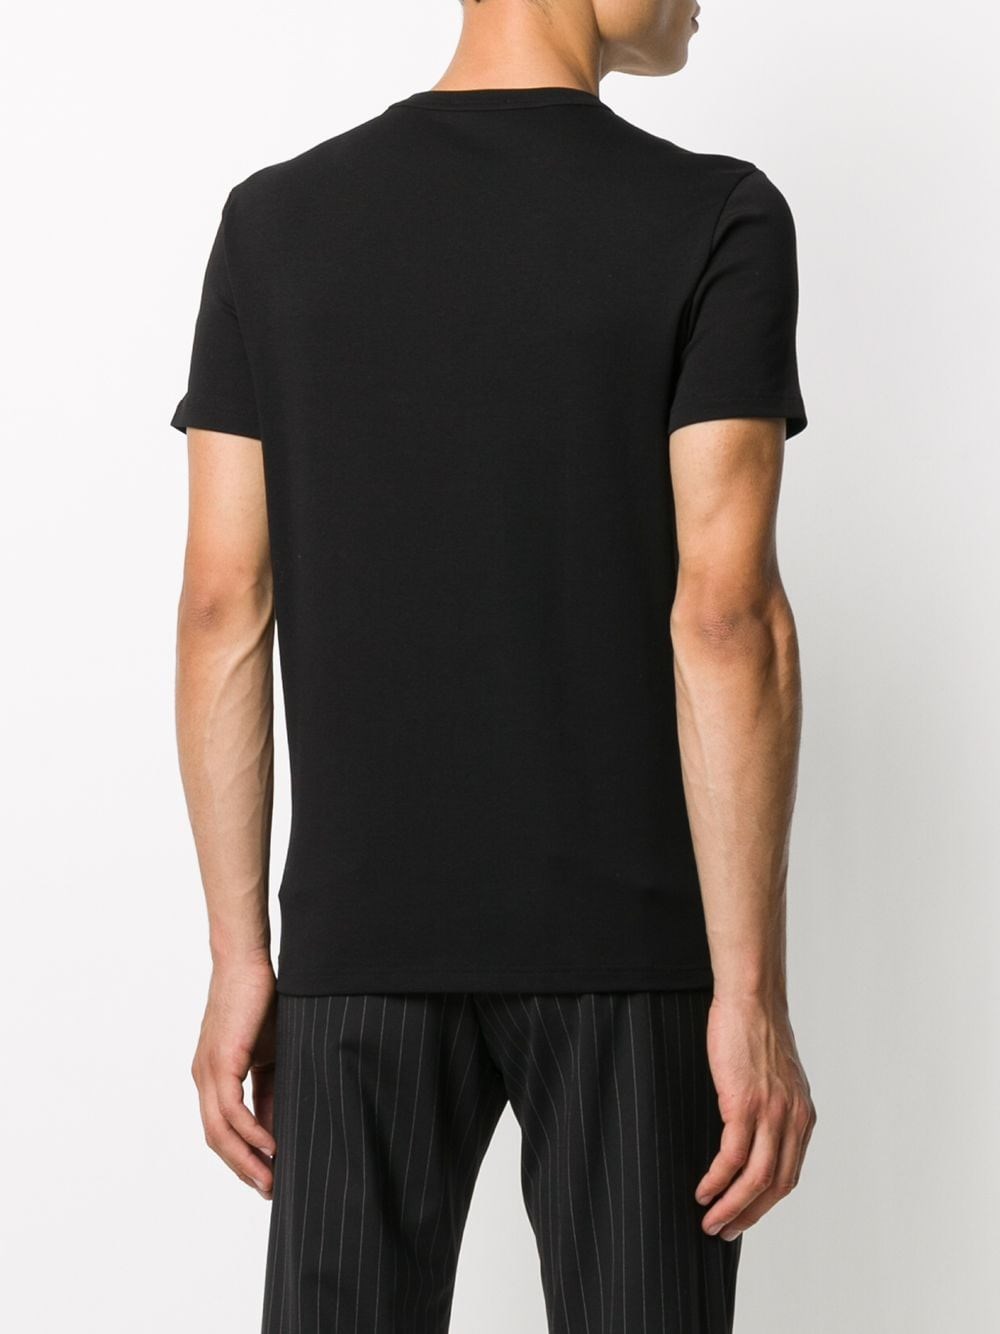 tom ford T-SHIRT available on montiboutique.com - 56529